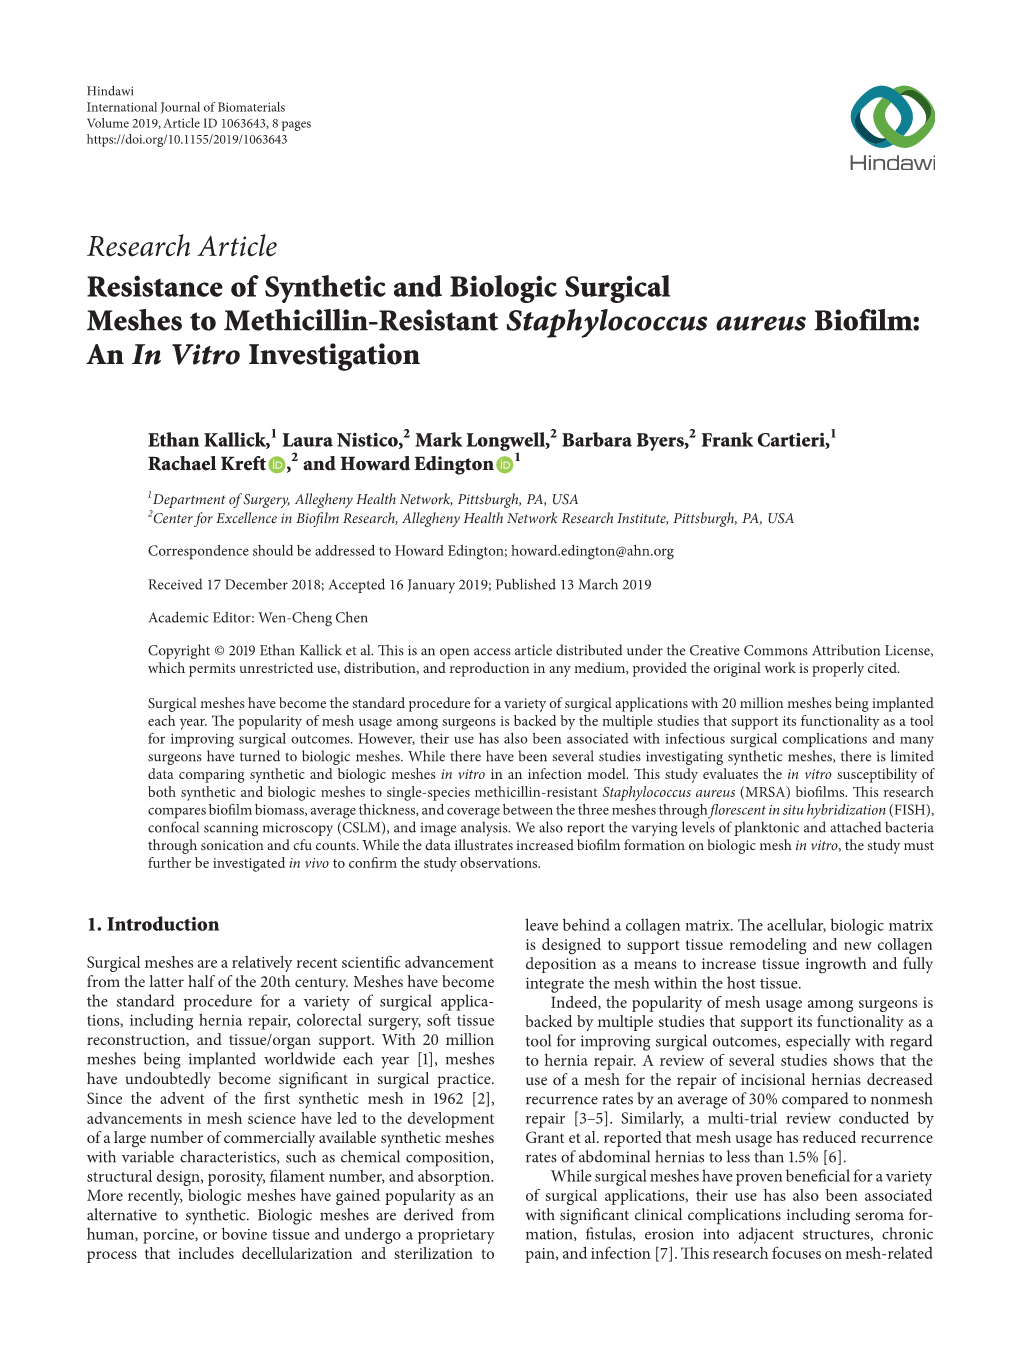 Research Article Resistance of Synthetic and Biologic Surgical Meshes to Methicillin-Resistant Staphylococcus Aureus Biofilm: an in Vitro Investigation